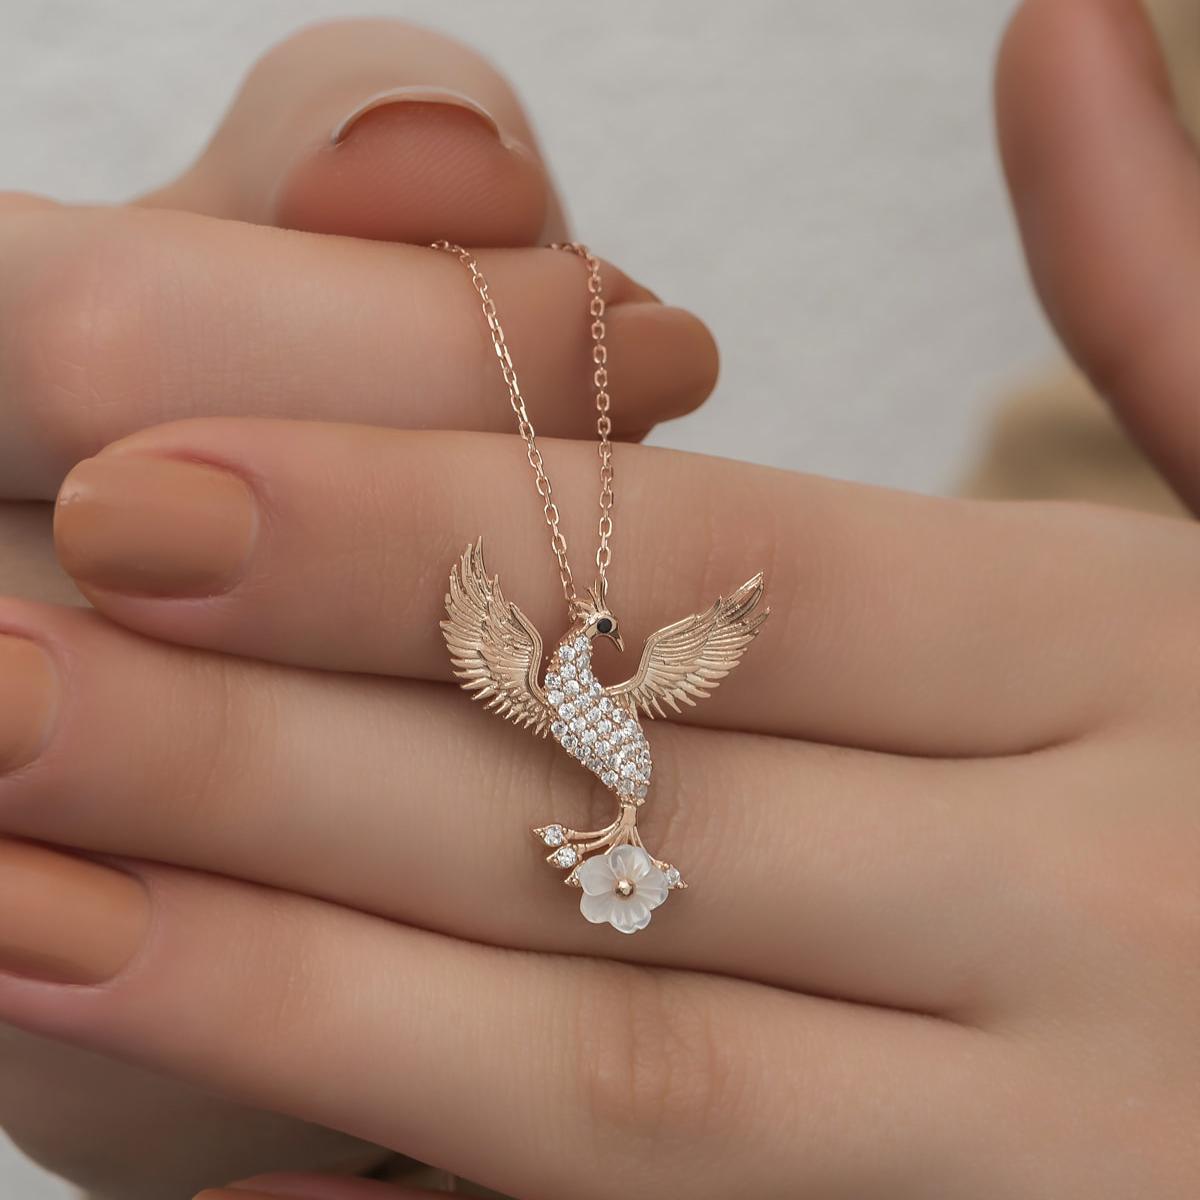 Rise Of The Phoenix Necklace • Phoenix Rising with Magnolia Necklace - Trending Silver Gifts